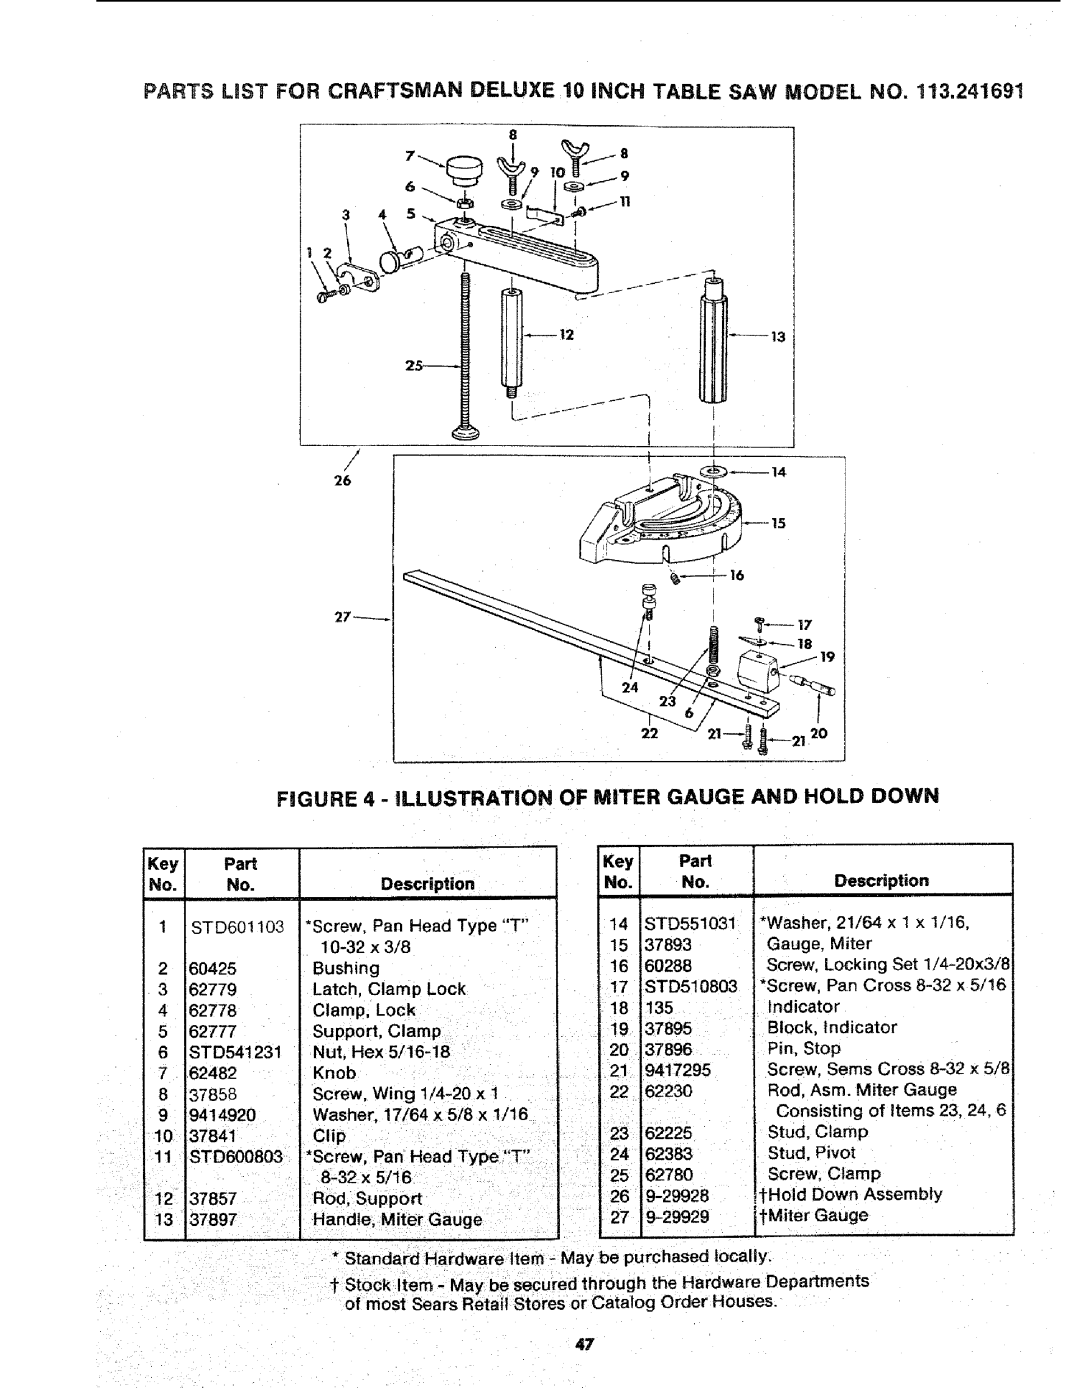 Sears 113.241591 PARTS LaST FOR CRAFTSMAN DELUXE 10 iNCH TABLE SAW MODEL NO, Illustration Of Miter Gauge And Hold Down 